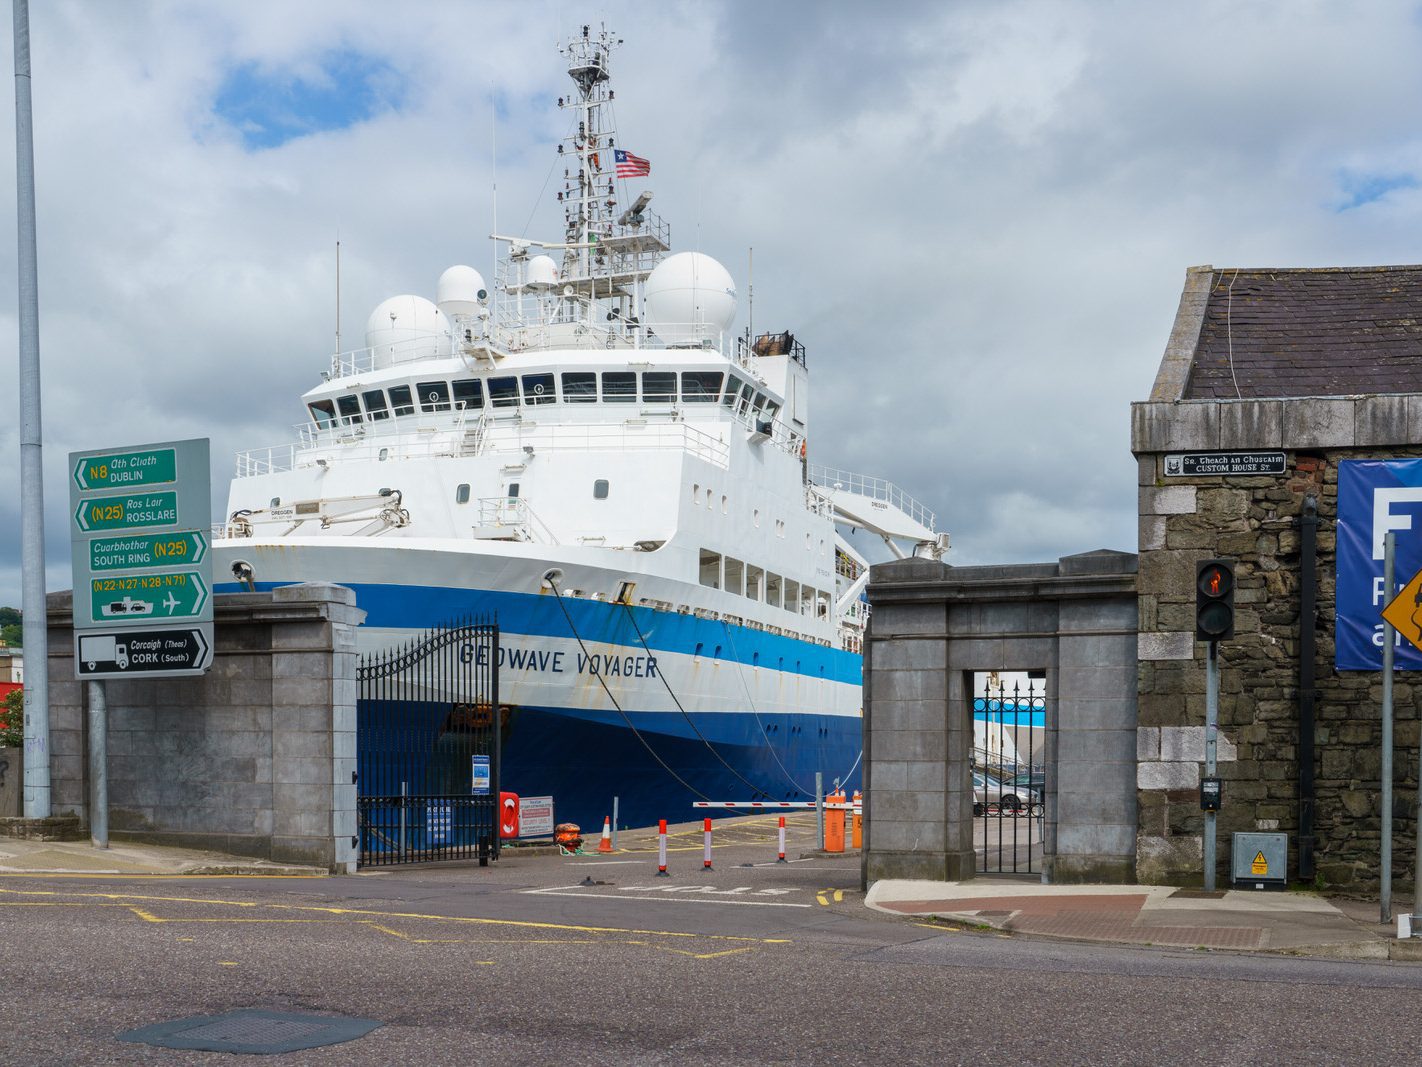 GEOWAVE VOYAGER LATER RENAMED EAGLE EXPLORER IMO 9381299 [AT CUSTOM HOUSE QUAY IN CORK JULY 2016] 005